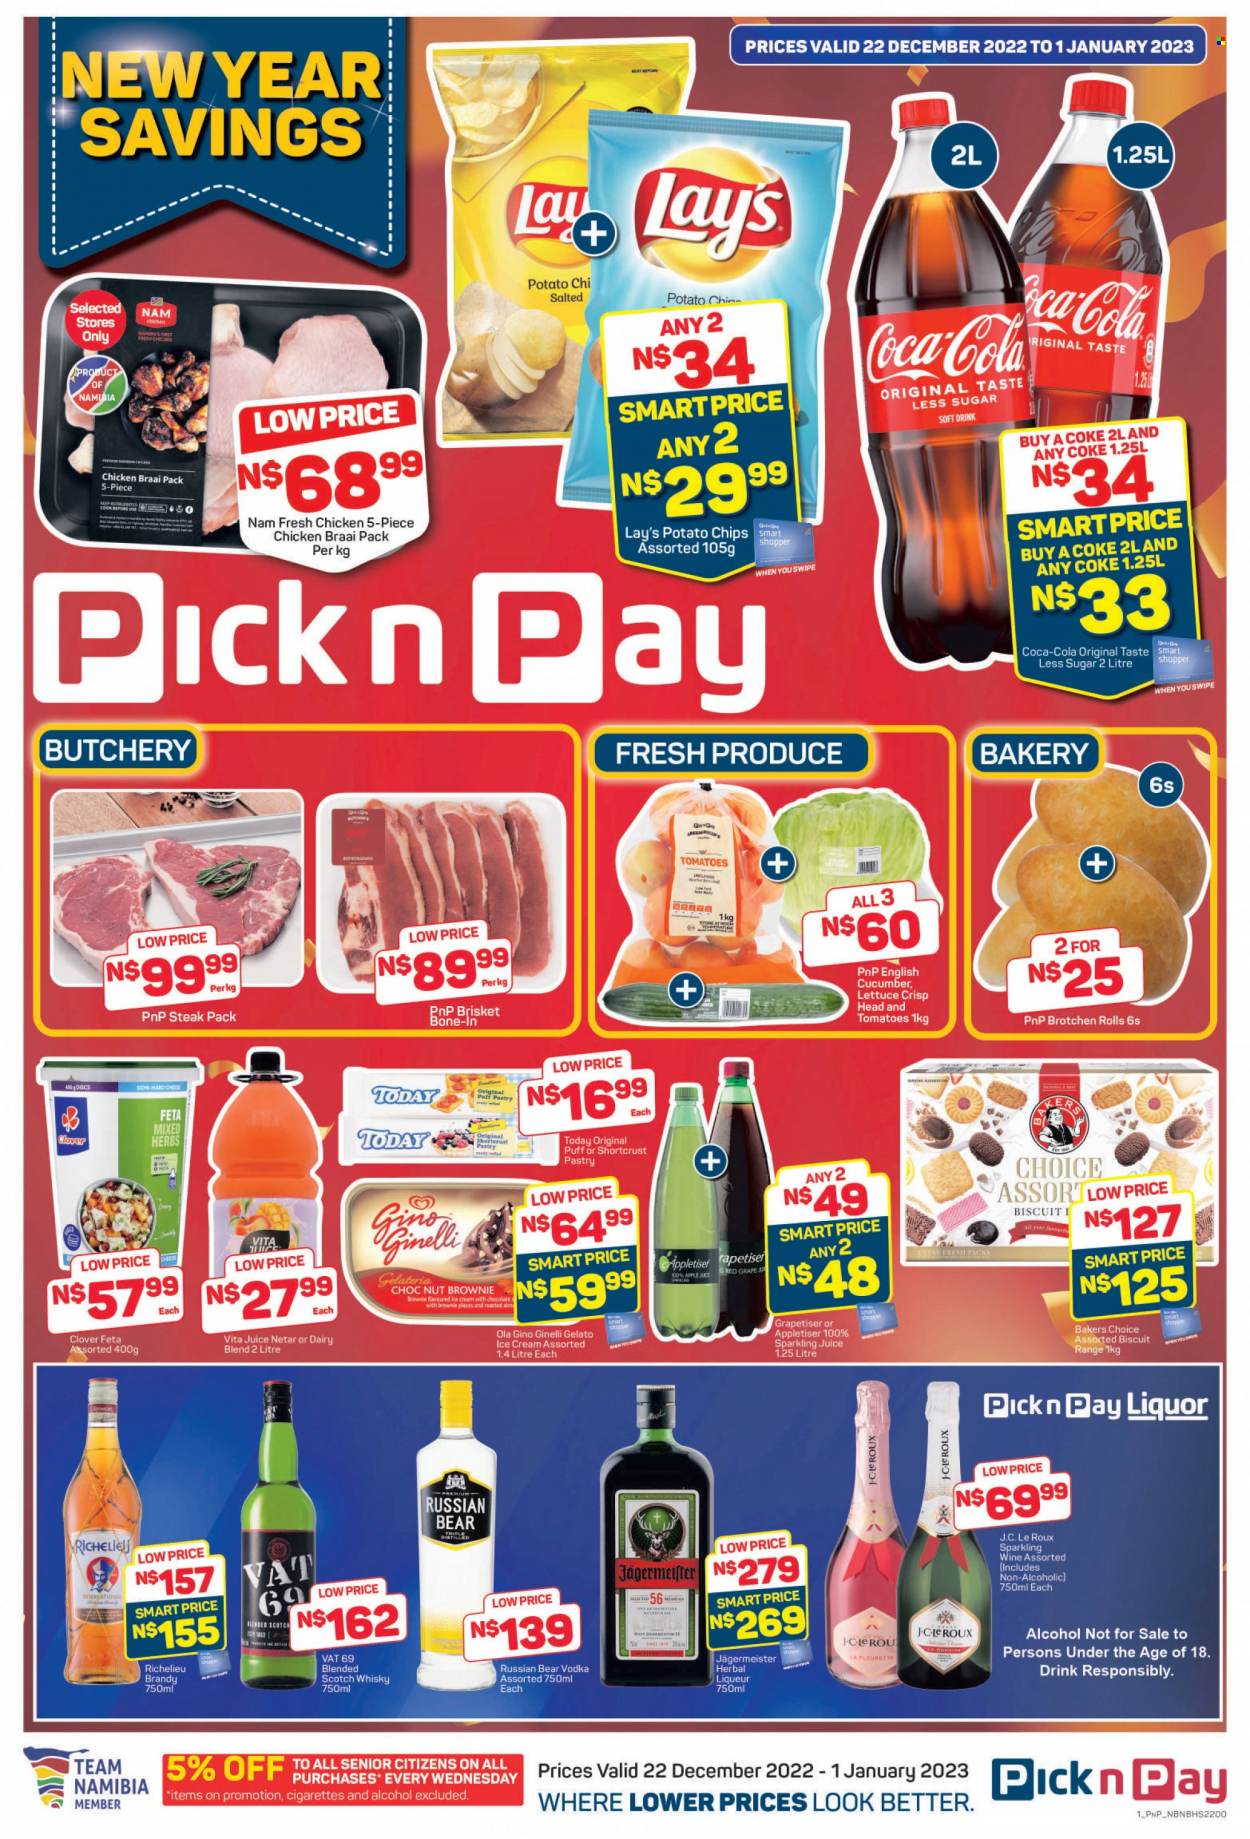 Pick n Pay catalogue  - 22/12/2022 - 01/01/2023 - Sales products - shortcrust pastry, brownies, lettuce, feta cheese, Clover, dairy blend, puff pastry, ice cream, Gino Ginelli, Ola, gelato, biscuit, potato chips, chips, Lay's, apple juice, Coca-Cola, juice, soft drink, sparkling juice, Bai, sparkling wine, wine, alcohol, brandy, liqueur, vodka, liquor, herbal liqueur, Richelieu, Jägermeister, Russian Bear, Vat 69, scotch whisky, whisky, steak, Bakers. Page 1.